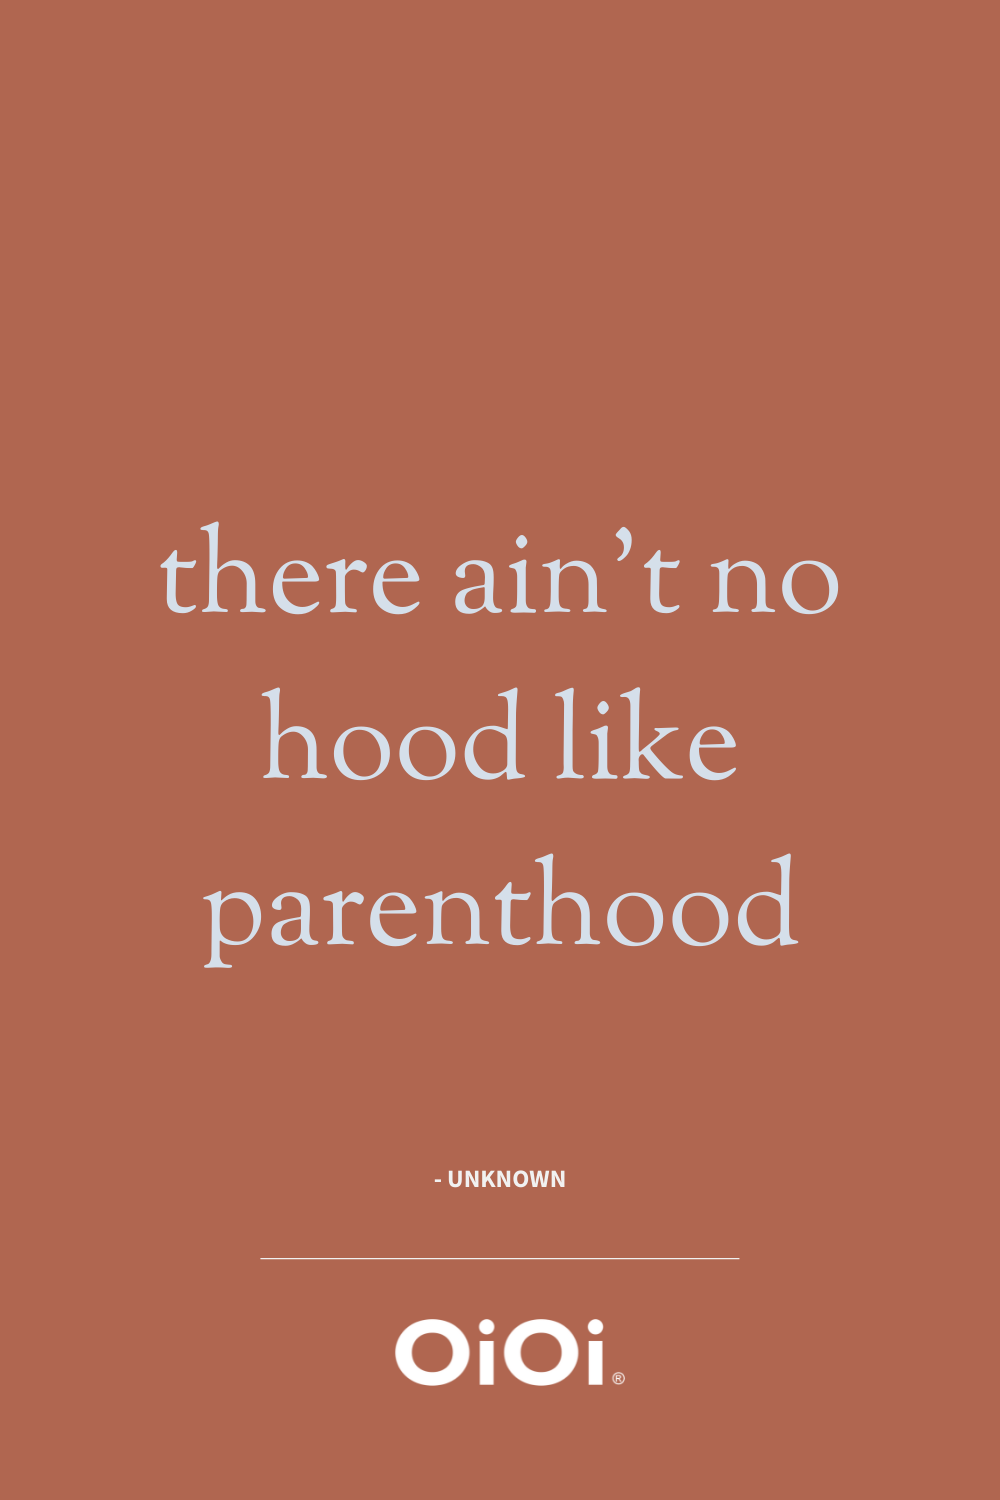 quote: there ain't no hood like parenthood